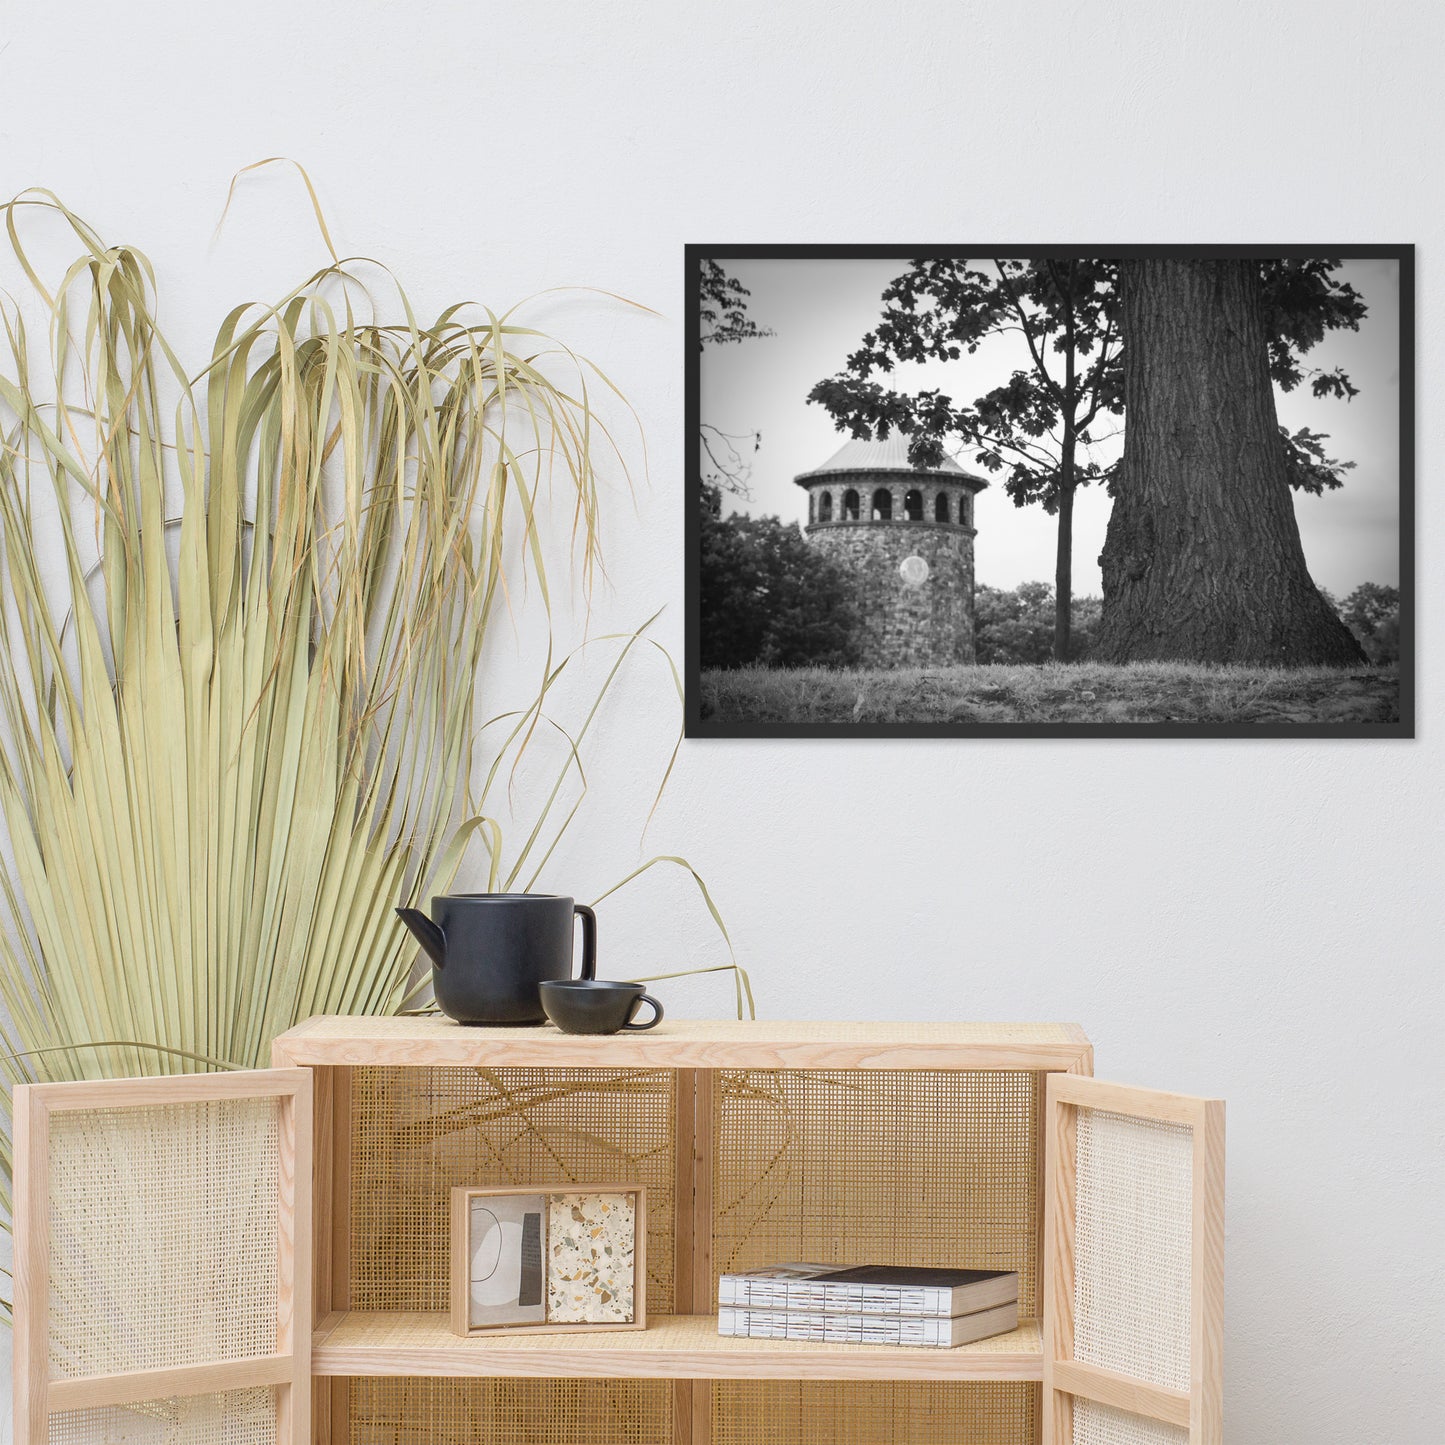 Rockford Tower in Black and White Framed Photo Paper Wall Art Prints